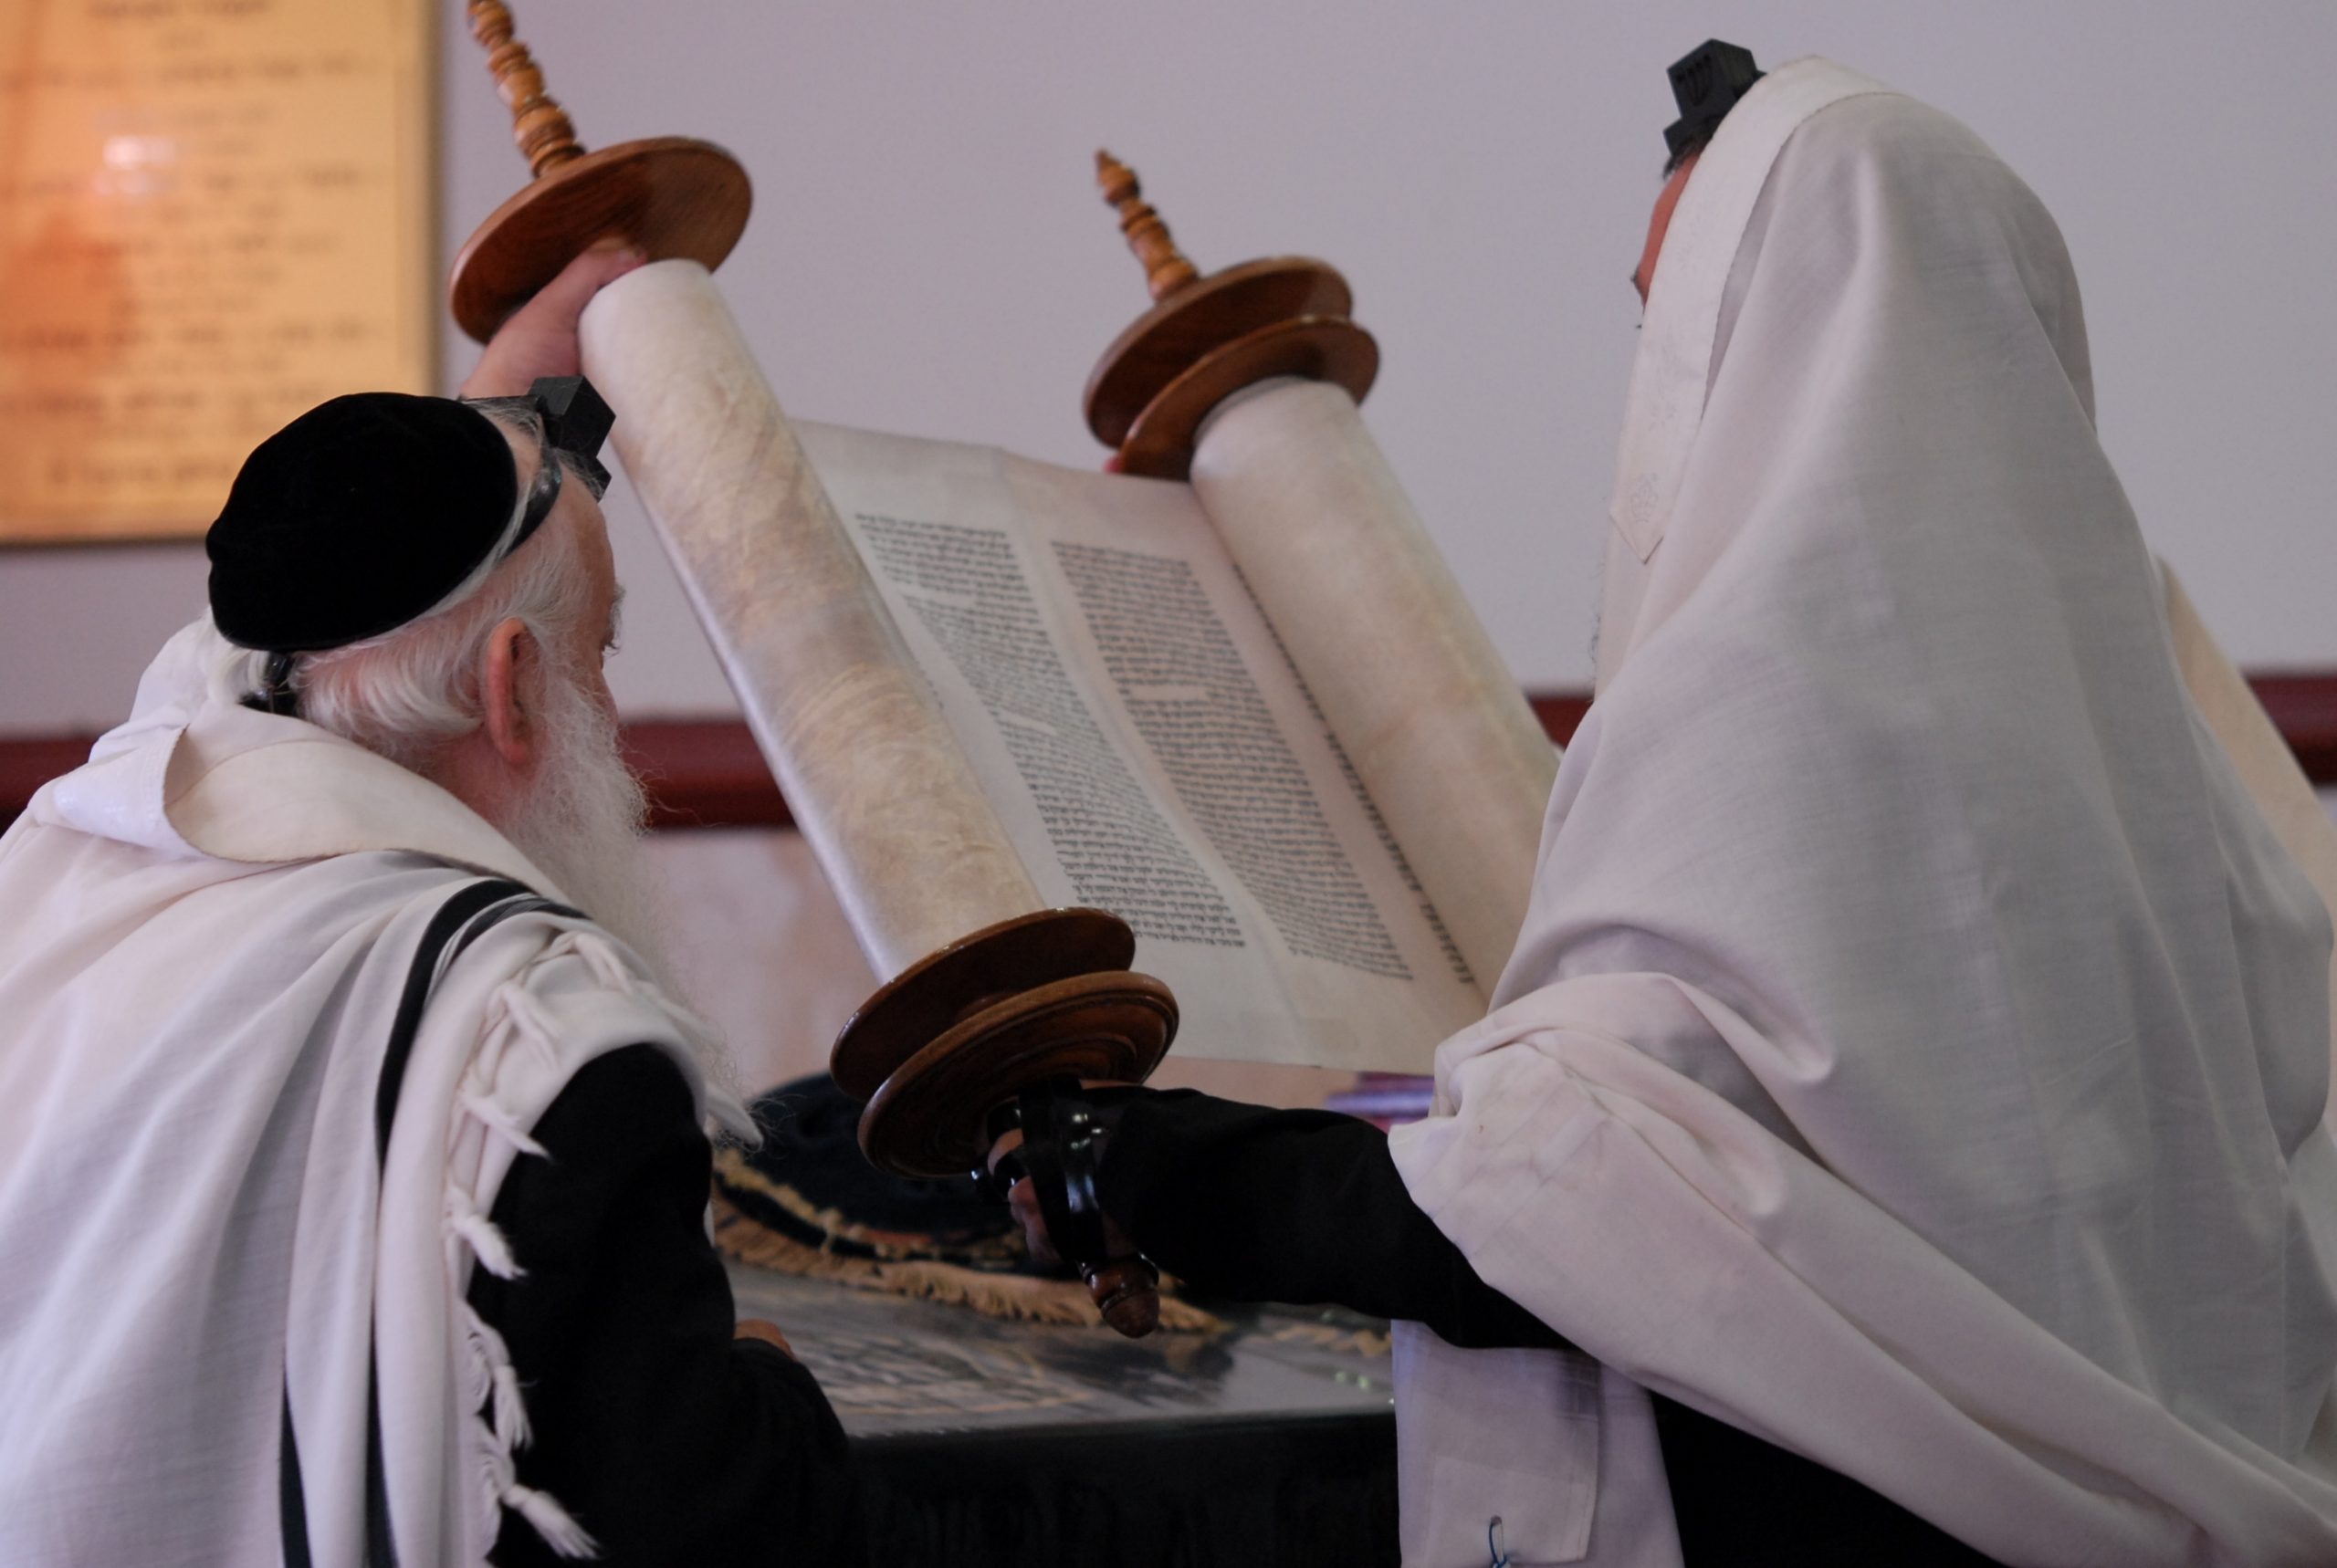 File:pikiwiki Israel 16920 Torah Reading - Wikimedia Commons regarding What Is The Next Reading For Torah